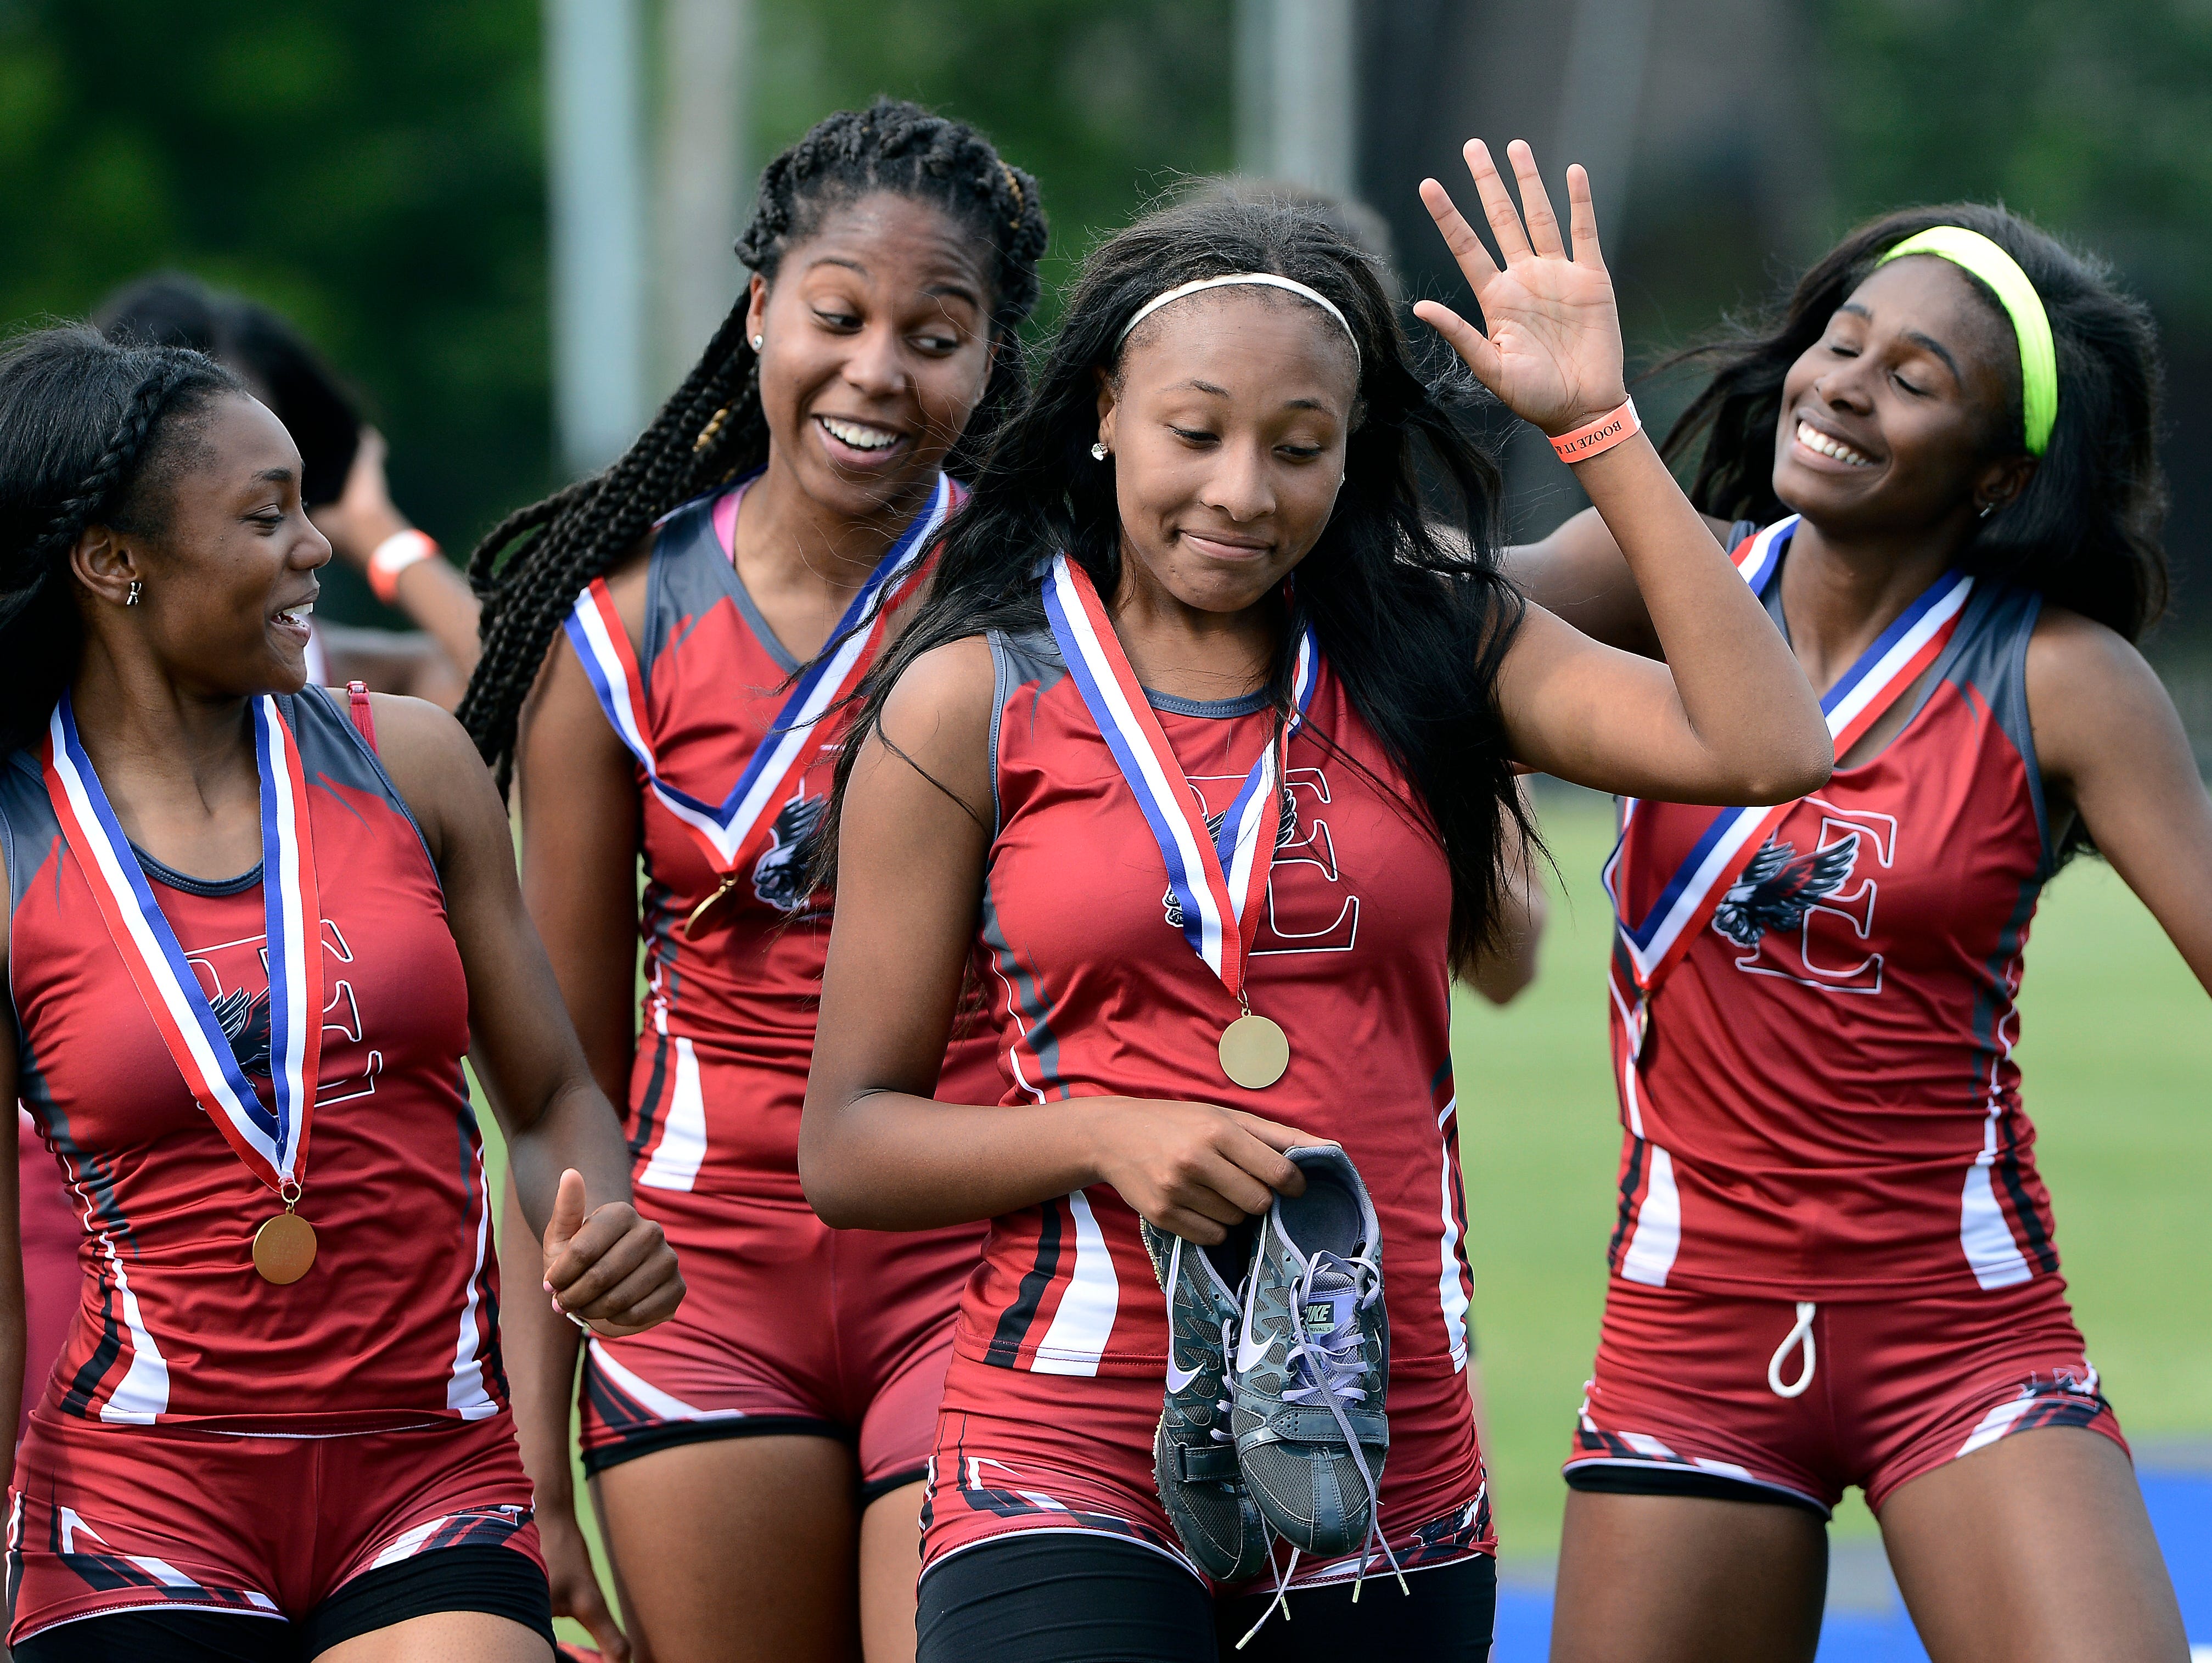 East Nashvilles' Alexis Patterson, left, Alexis Butler, Kenndi Johnson and Aaliyah Cummings celebrate after receiving their Class A-AA state championship medals for the 4x200 meter relay during the Tennessee girls state track championships at Middle Tennessee State University.